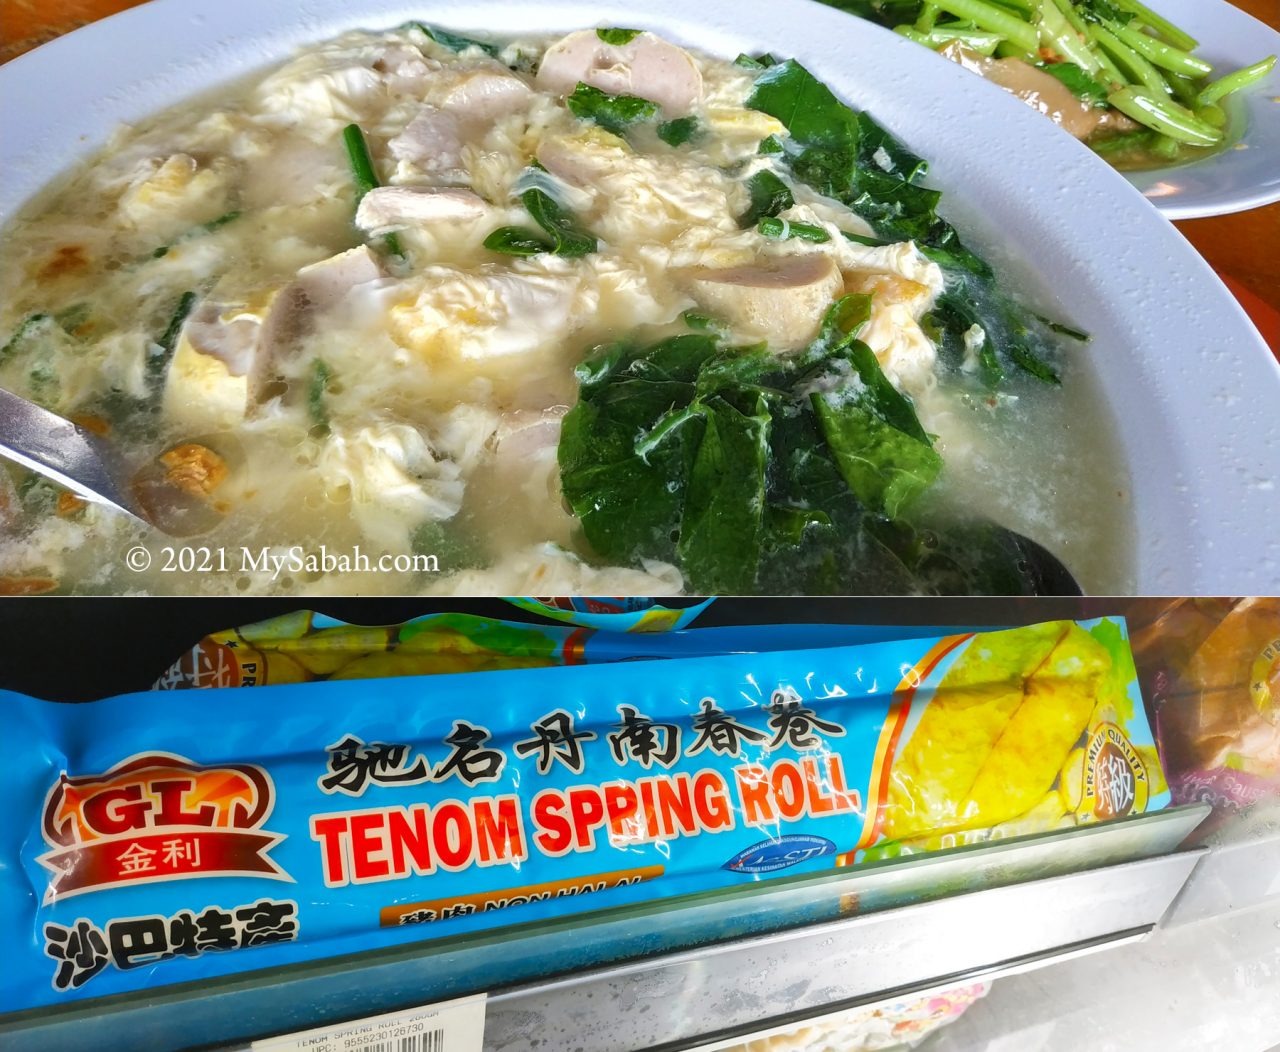 Top: soup with spring rolls, eggs and Sabah veges. Bottom: Tenom spring rolls in supermarket